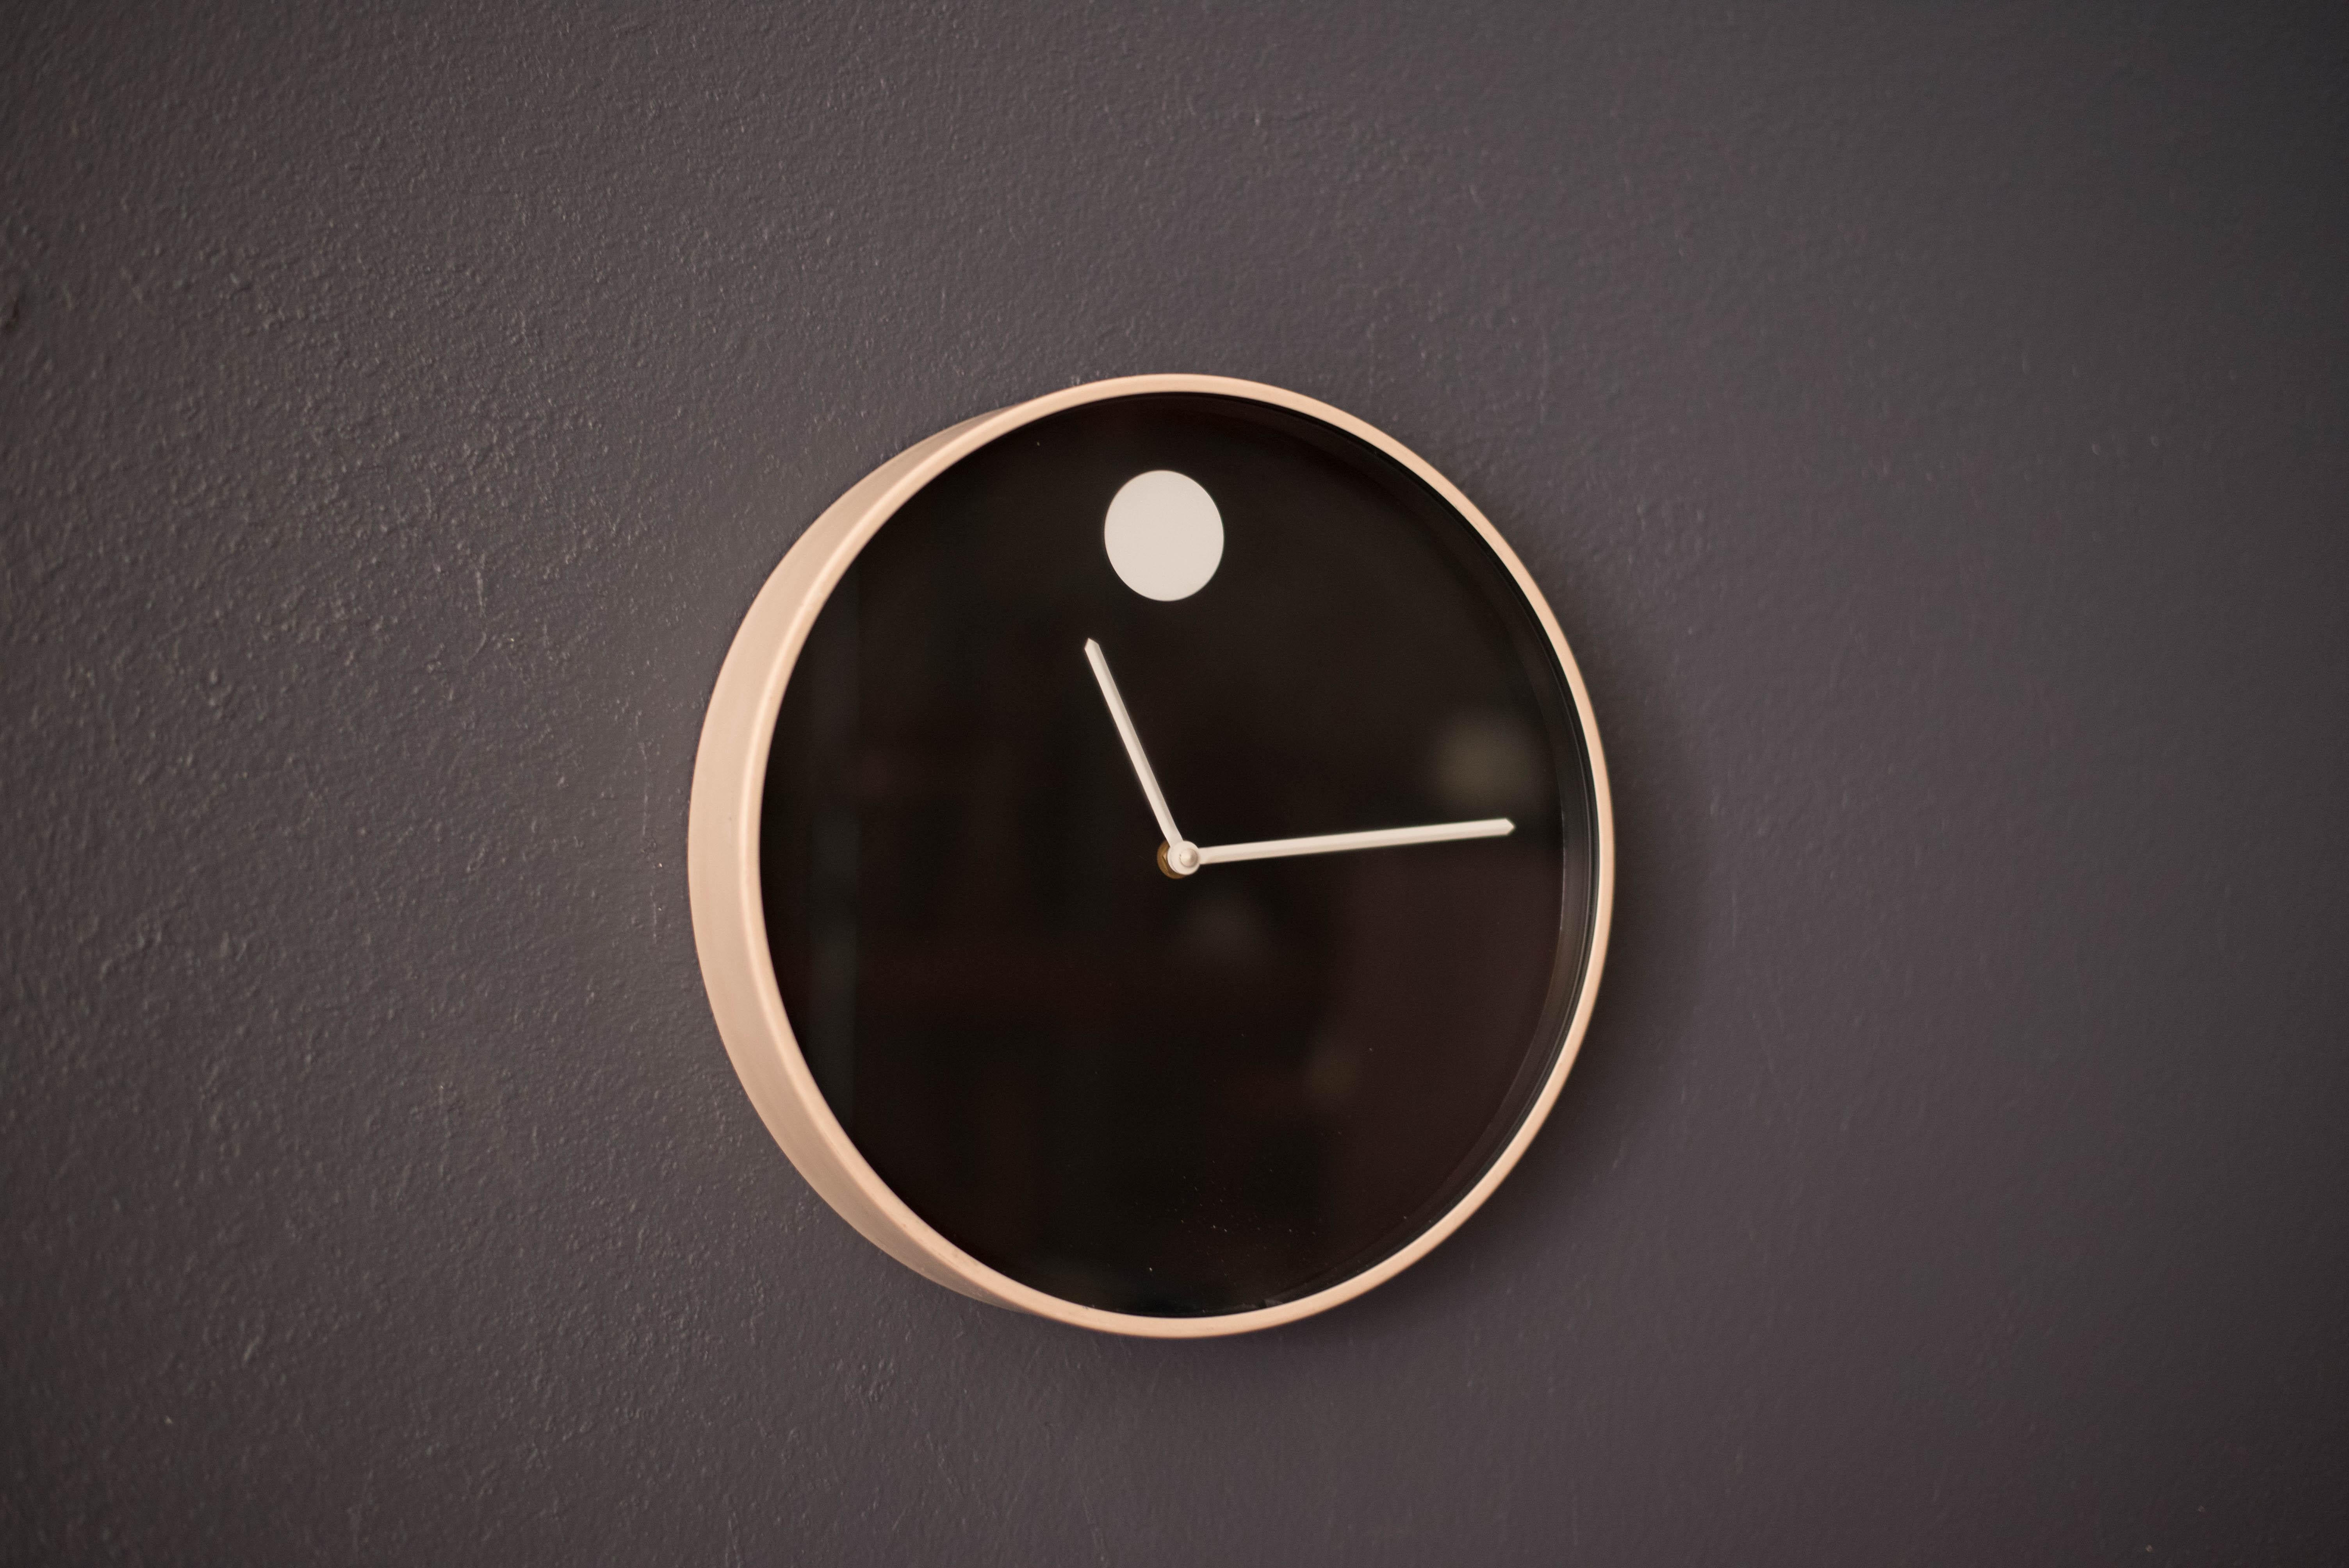 Mid-Century Modern museum wall clock designed by Nathan George Horwitt for Howard Miller Clock Company, Zeeland Michigan. Encased with an eggshell enameled finish and a striking black faceplate with glass protection. This piece of history was